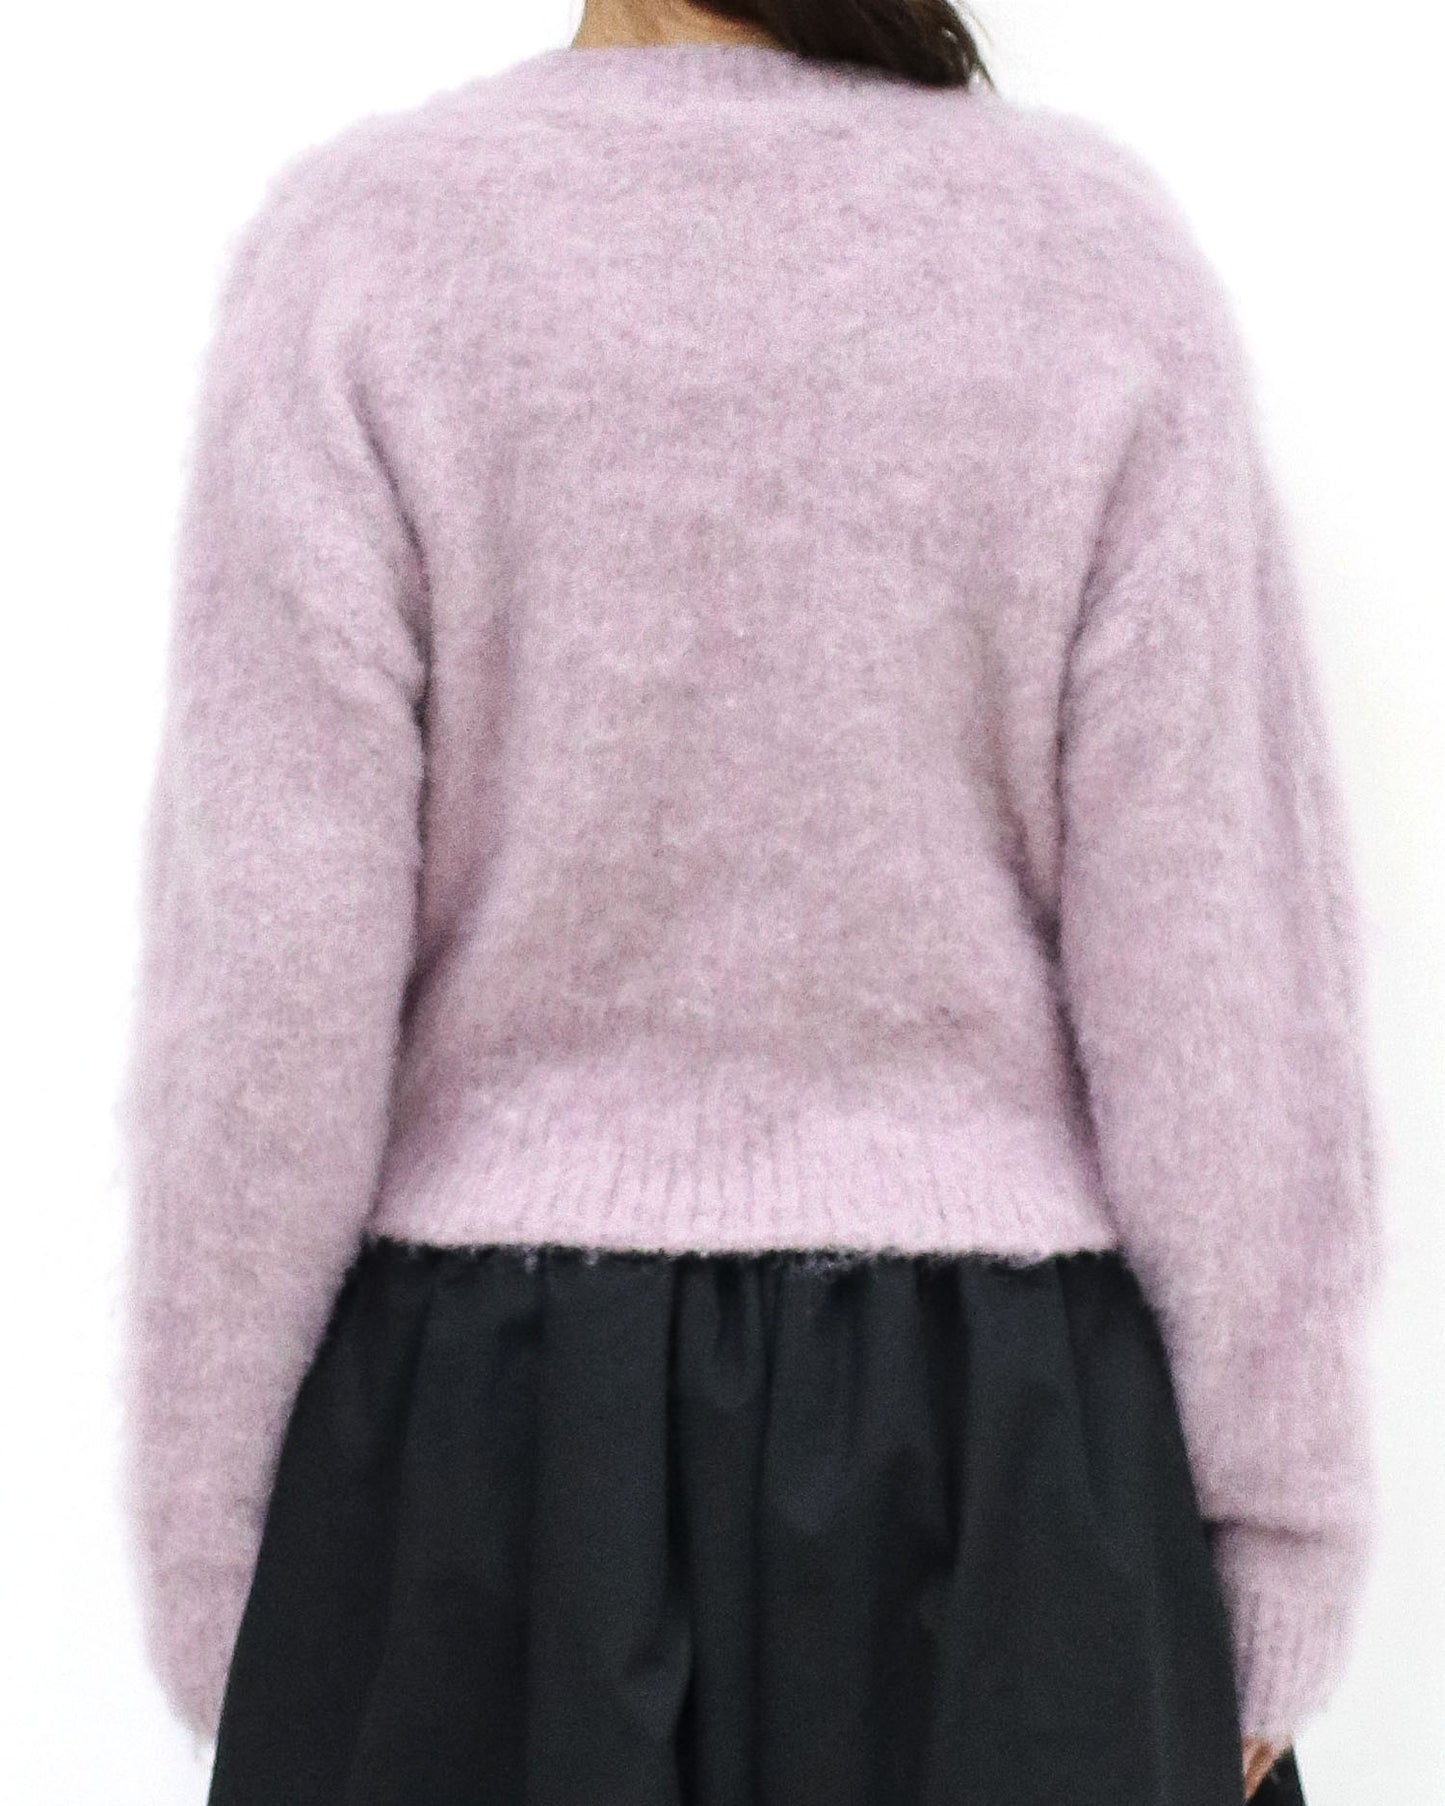 lilac boucle knitted top *pre-order*